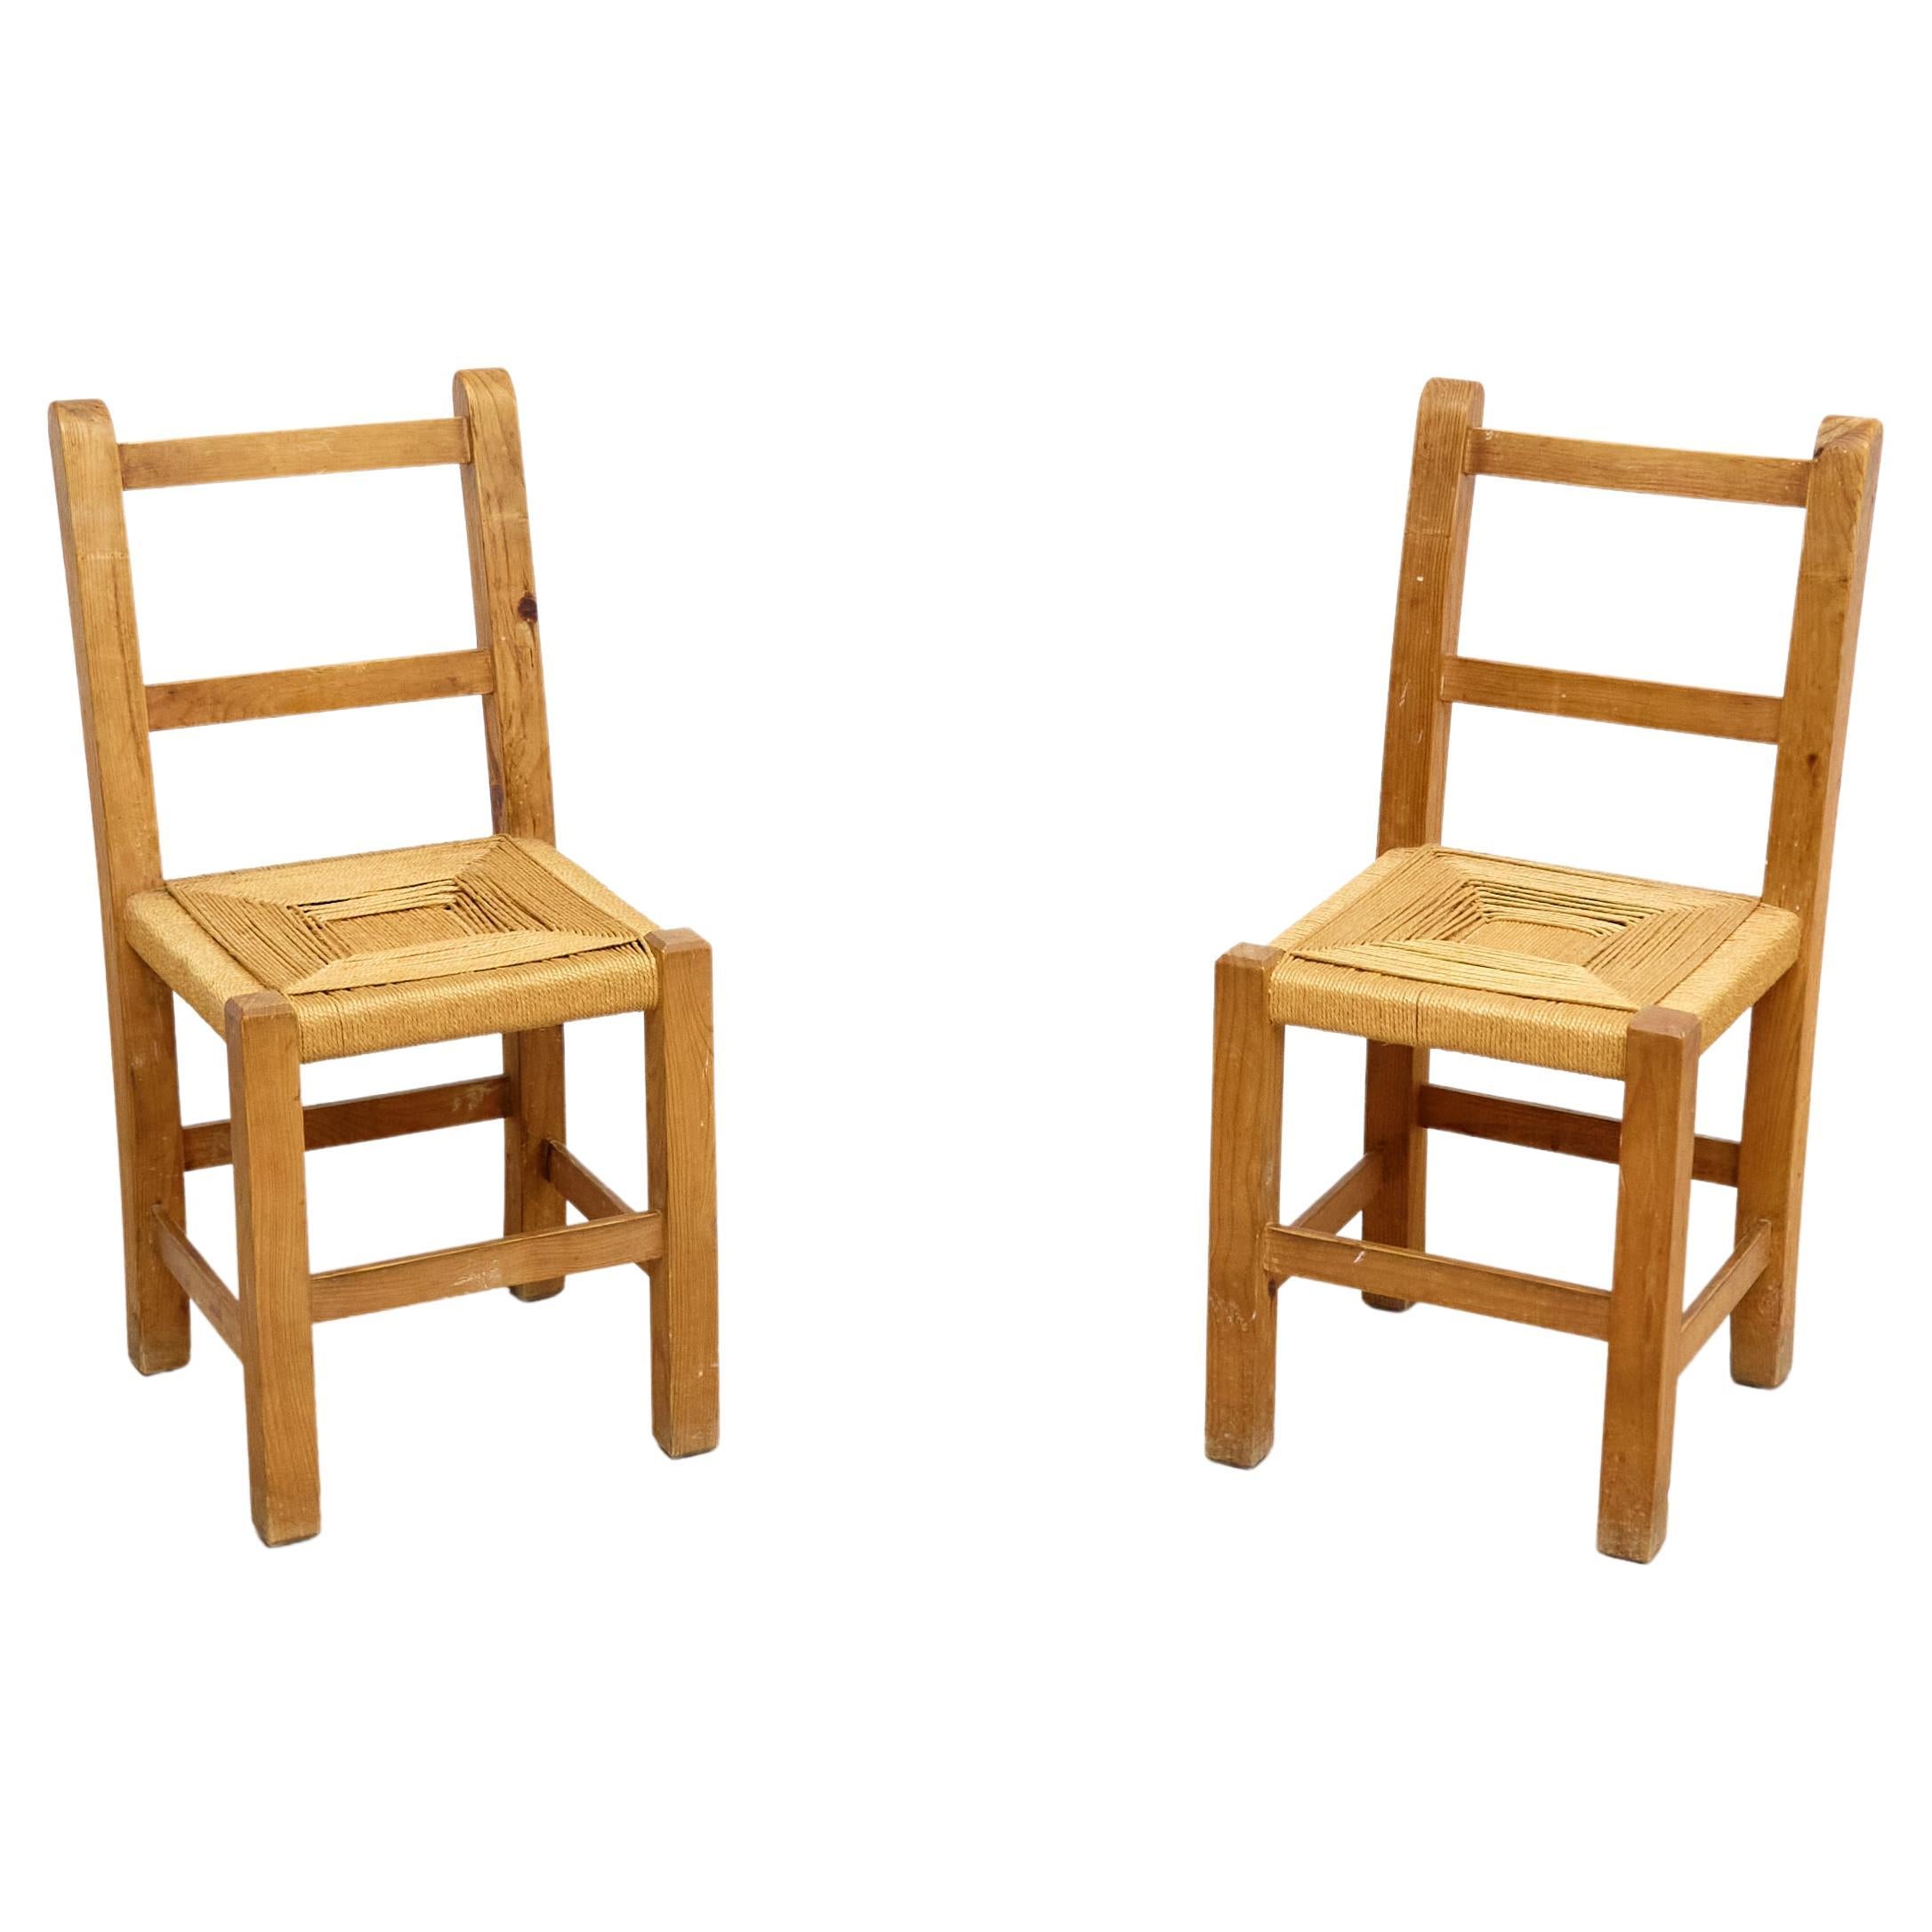 Pair of Mid-Century Modern Wood and Rattan French Rationalist Chairs, circa 1950 For Sale